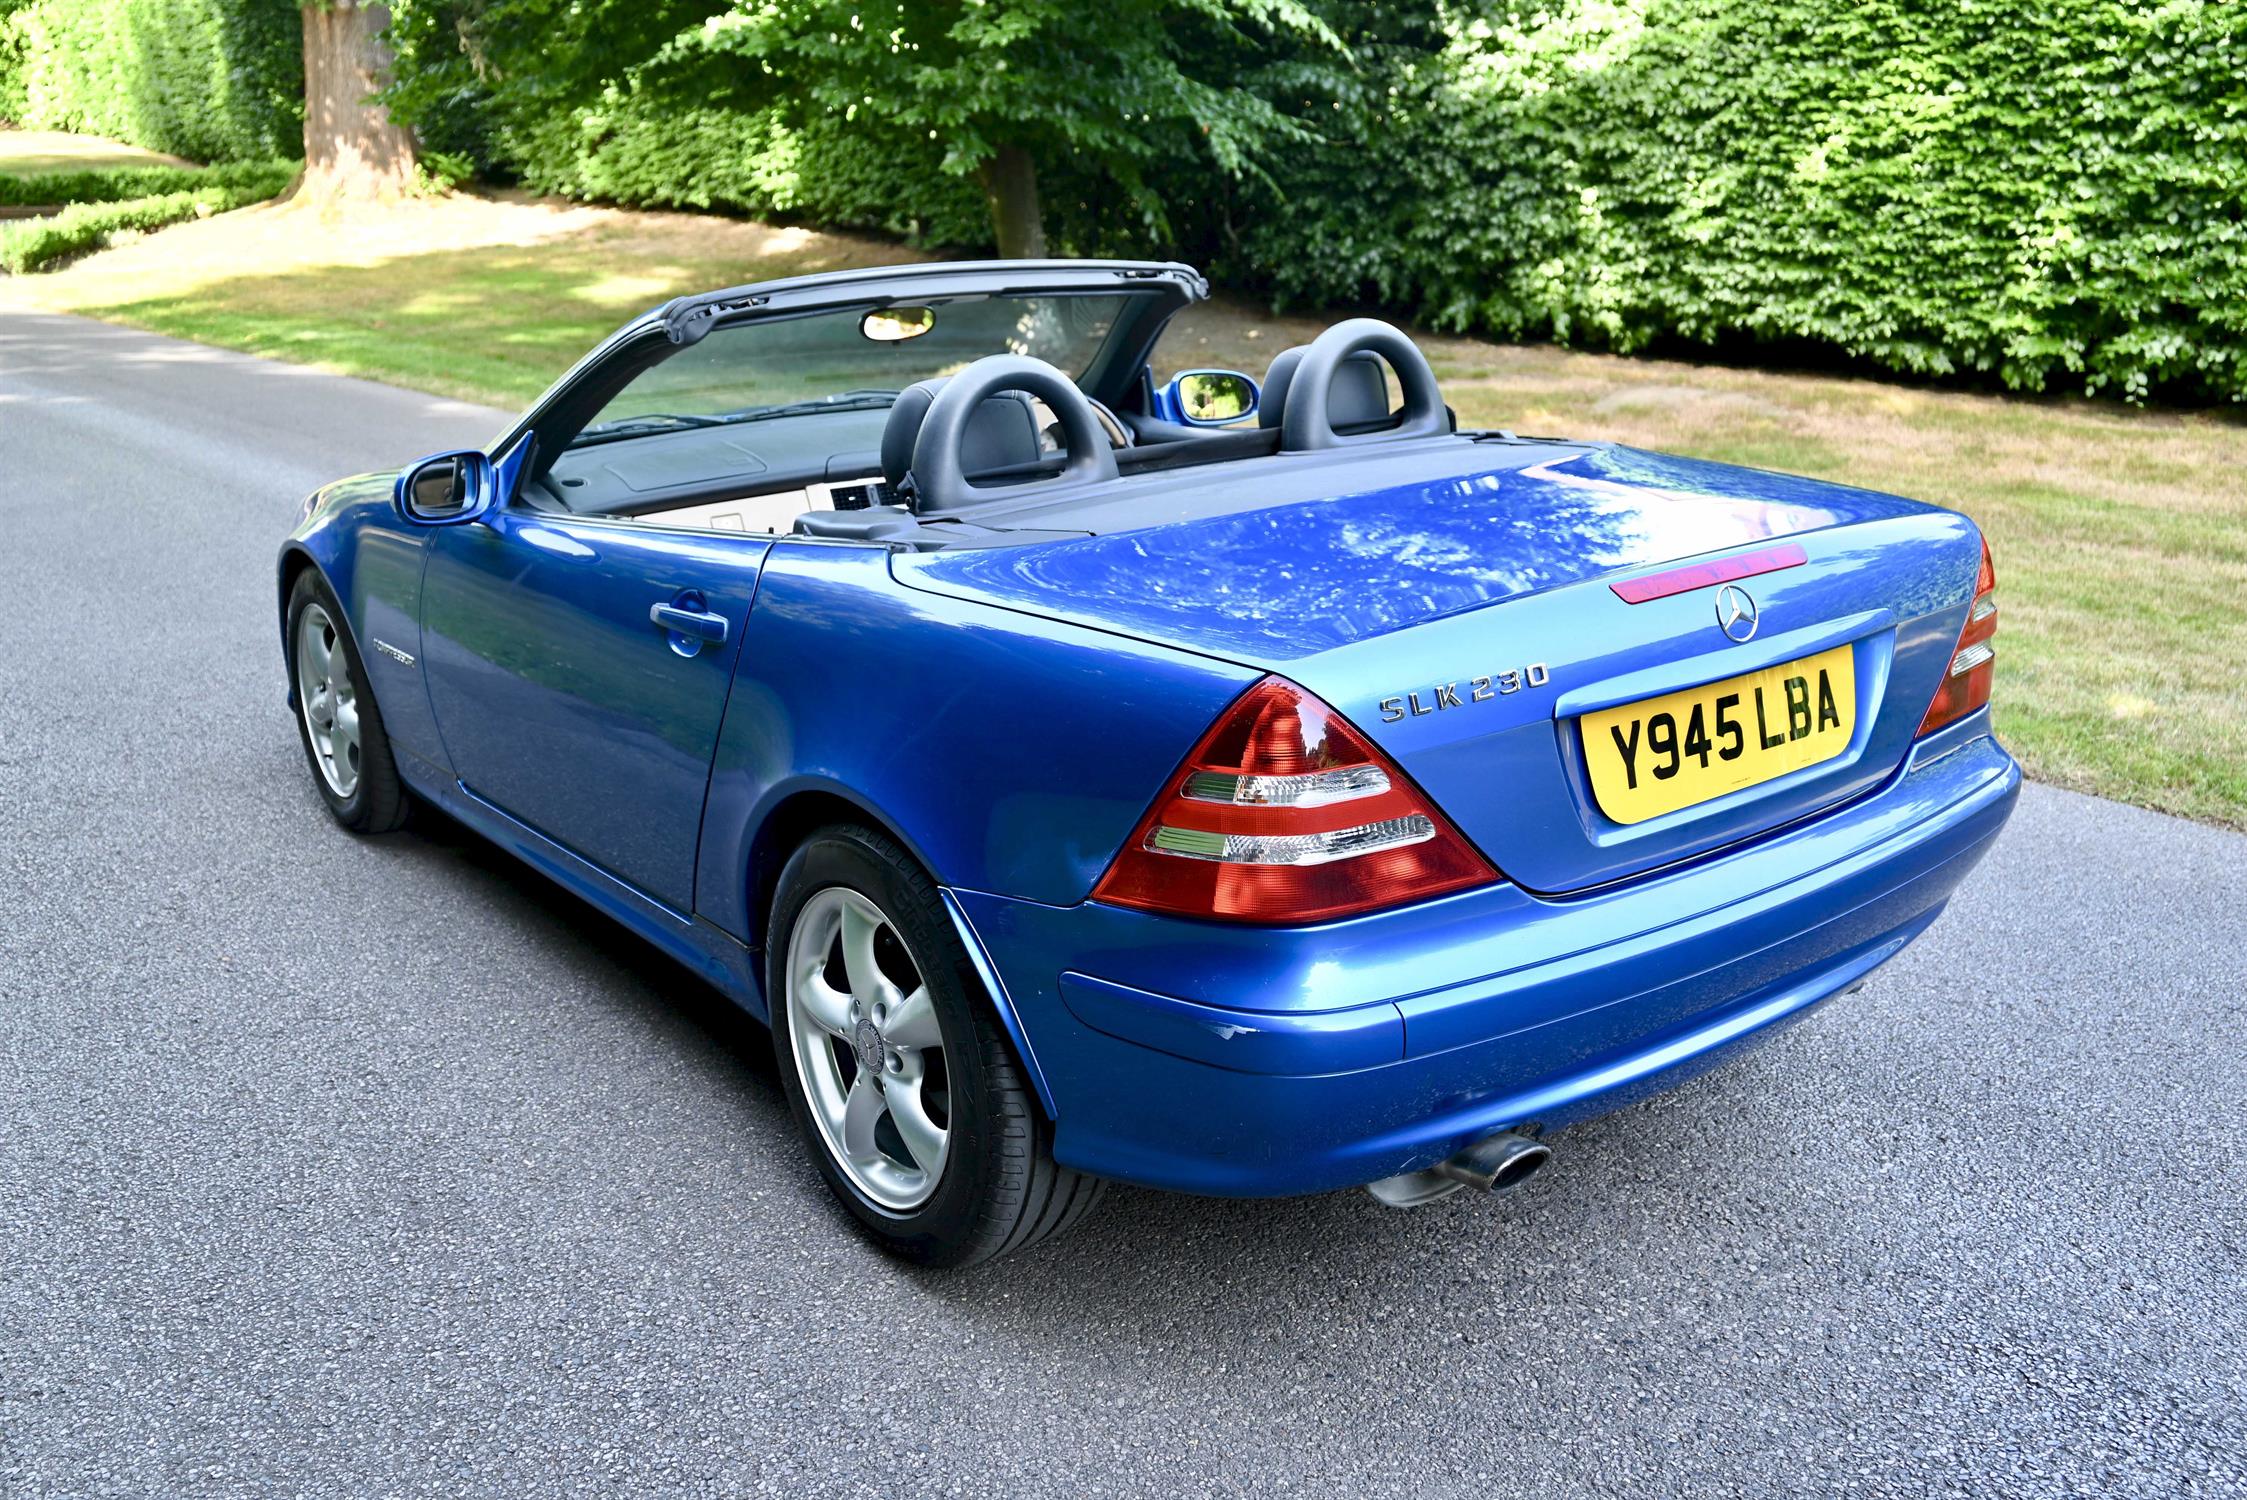 Mercedes Benz 230 SLK Convertible Auto Electric Blue coachwork with duo-tone black/beige leather - Image 5 of 15